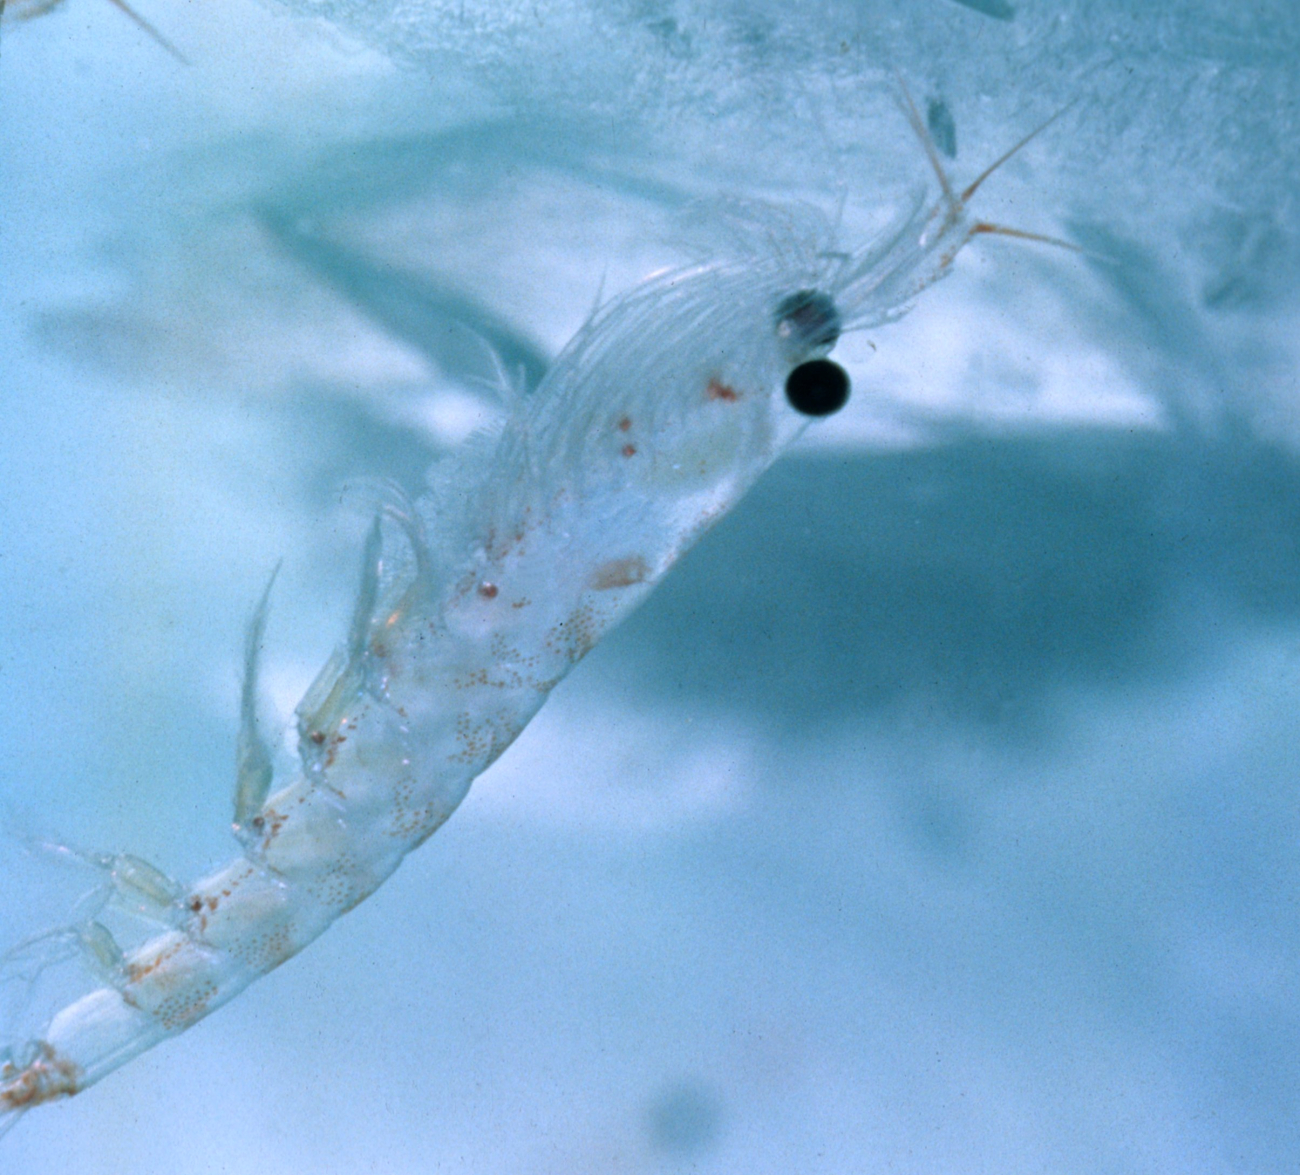 An Antarctic krill, Euphausia superb, can be seen here feeding under the icelayer that forms on the surface of the ocean during the winter